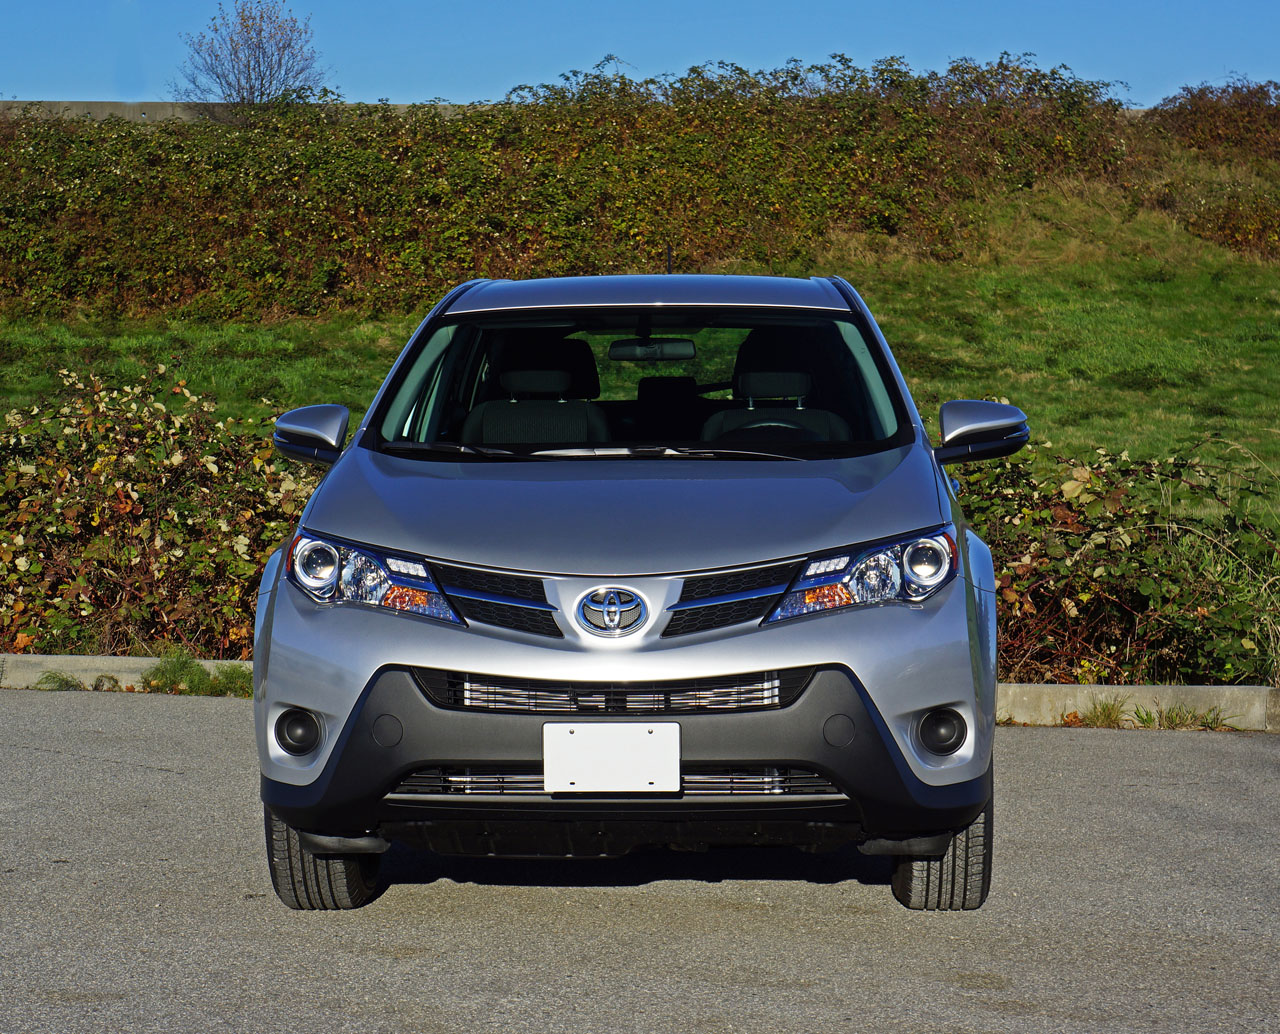 2015 Toyota Rav4 Le Awd Road Test Review The Car Magazine